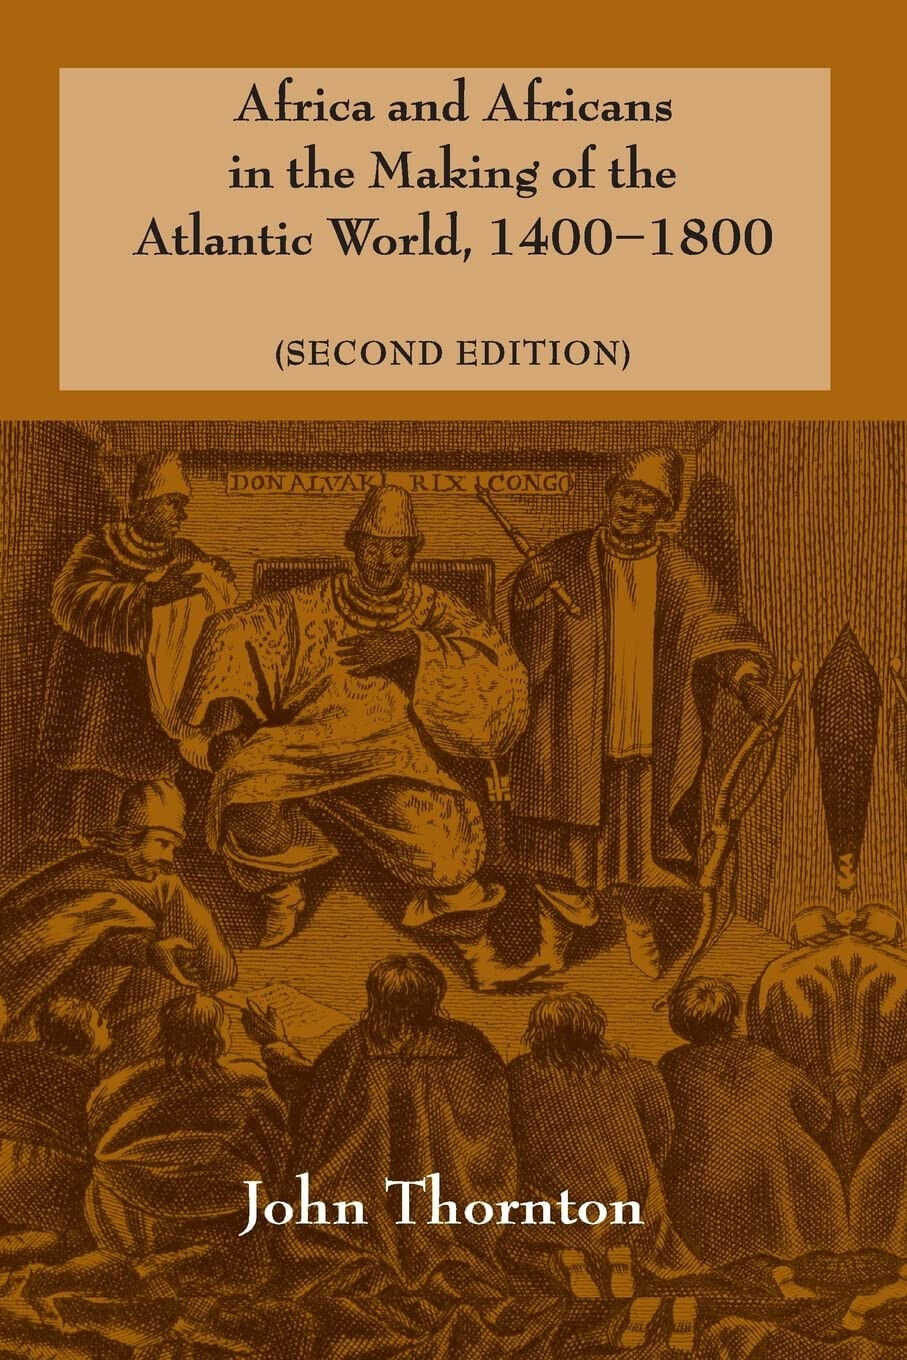 Africa and Africans in the Making of the Atlantic World, 1400-1800 - 2022 libro usato